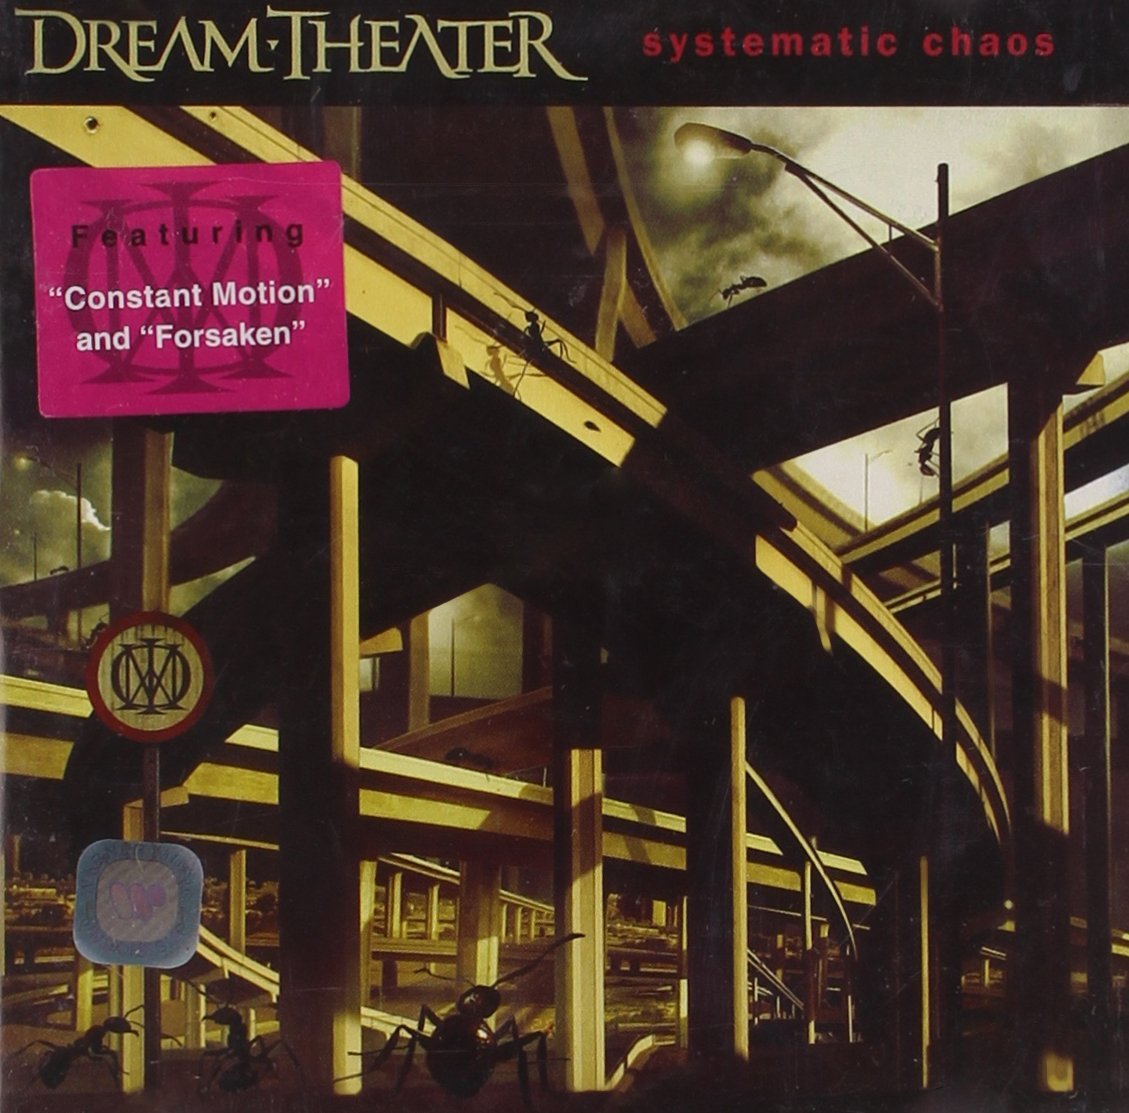 Dream Theater "Systematic Chaos" CD